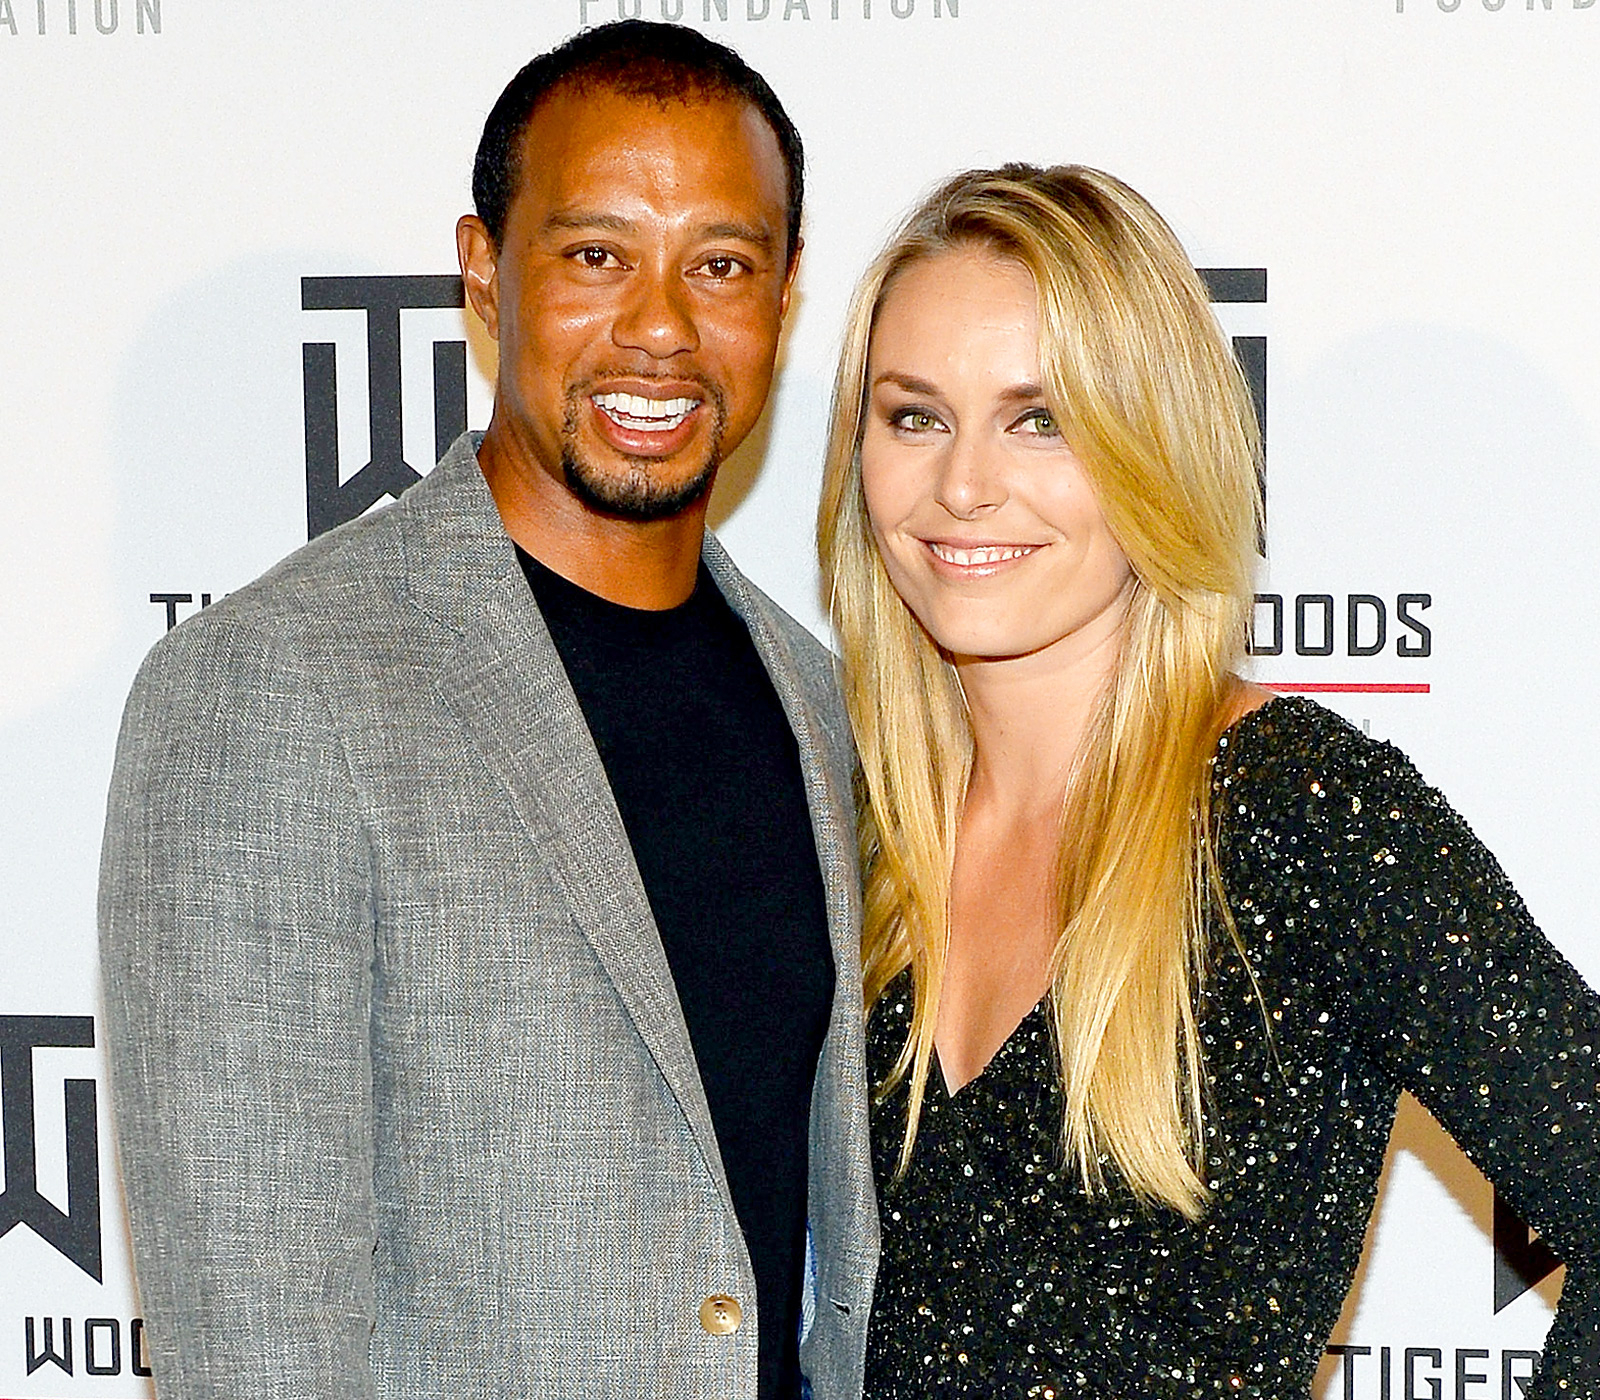 Lindsey Vonn Responds to Leaked Nude Photos of Her and Tiger Woods pic